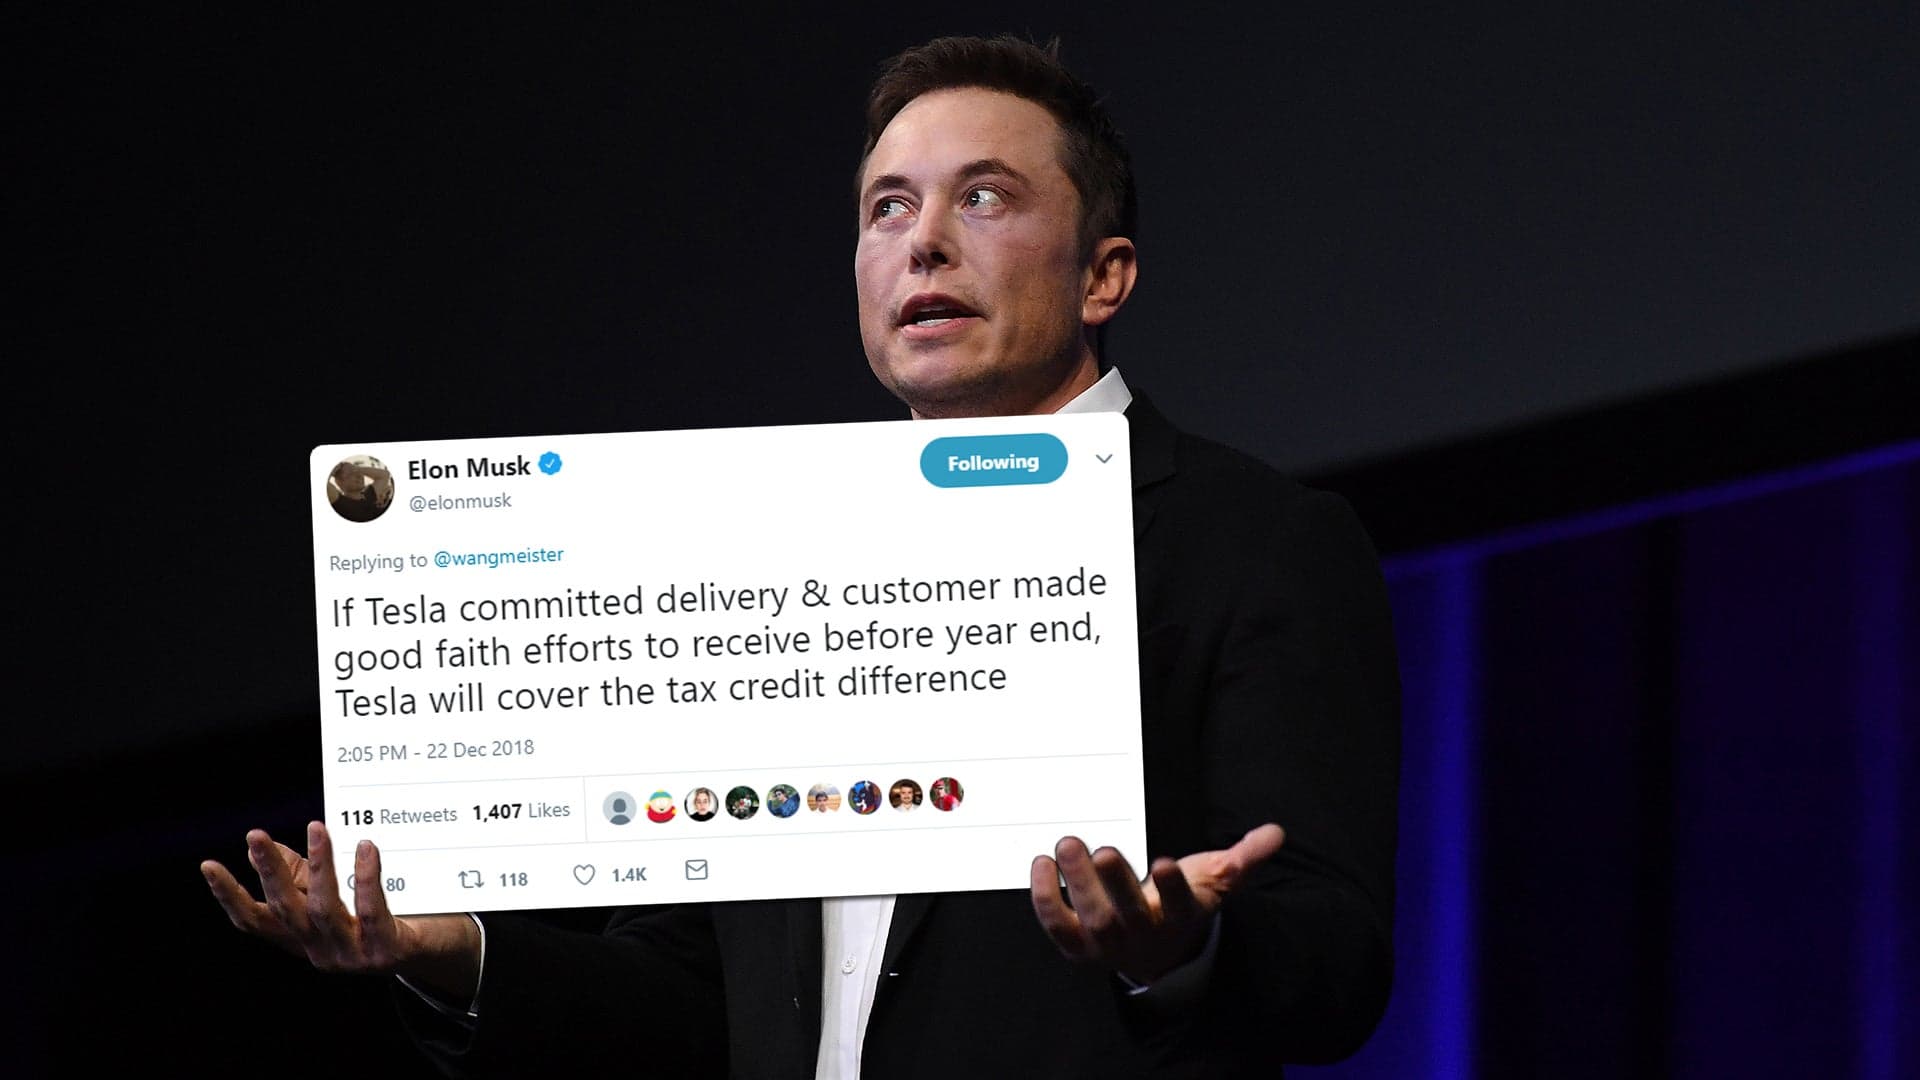 Elon Musk Promises to Repay Tax Credit if Tesla Misses Year-End Delivery